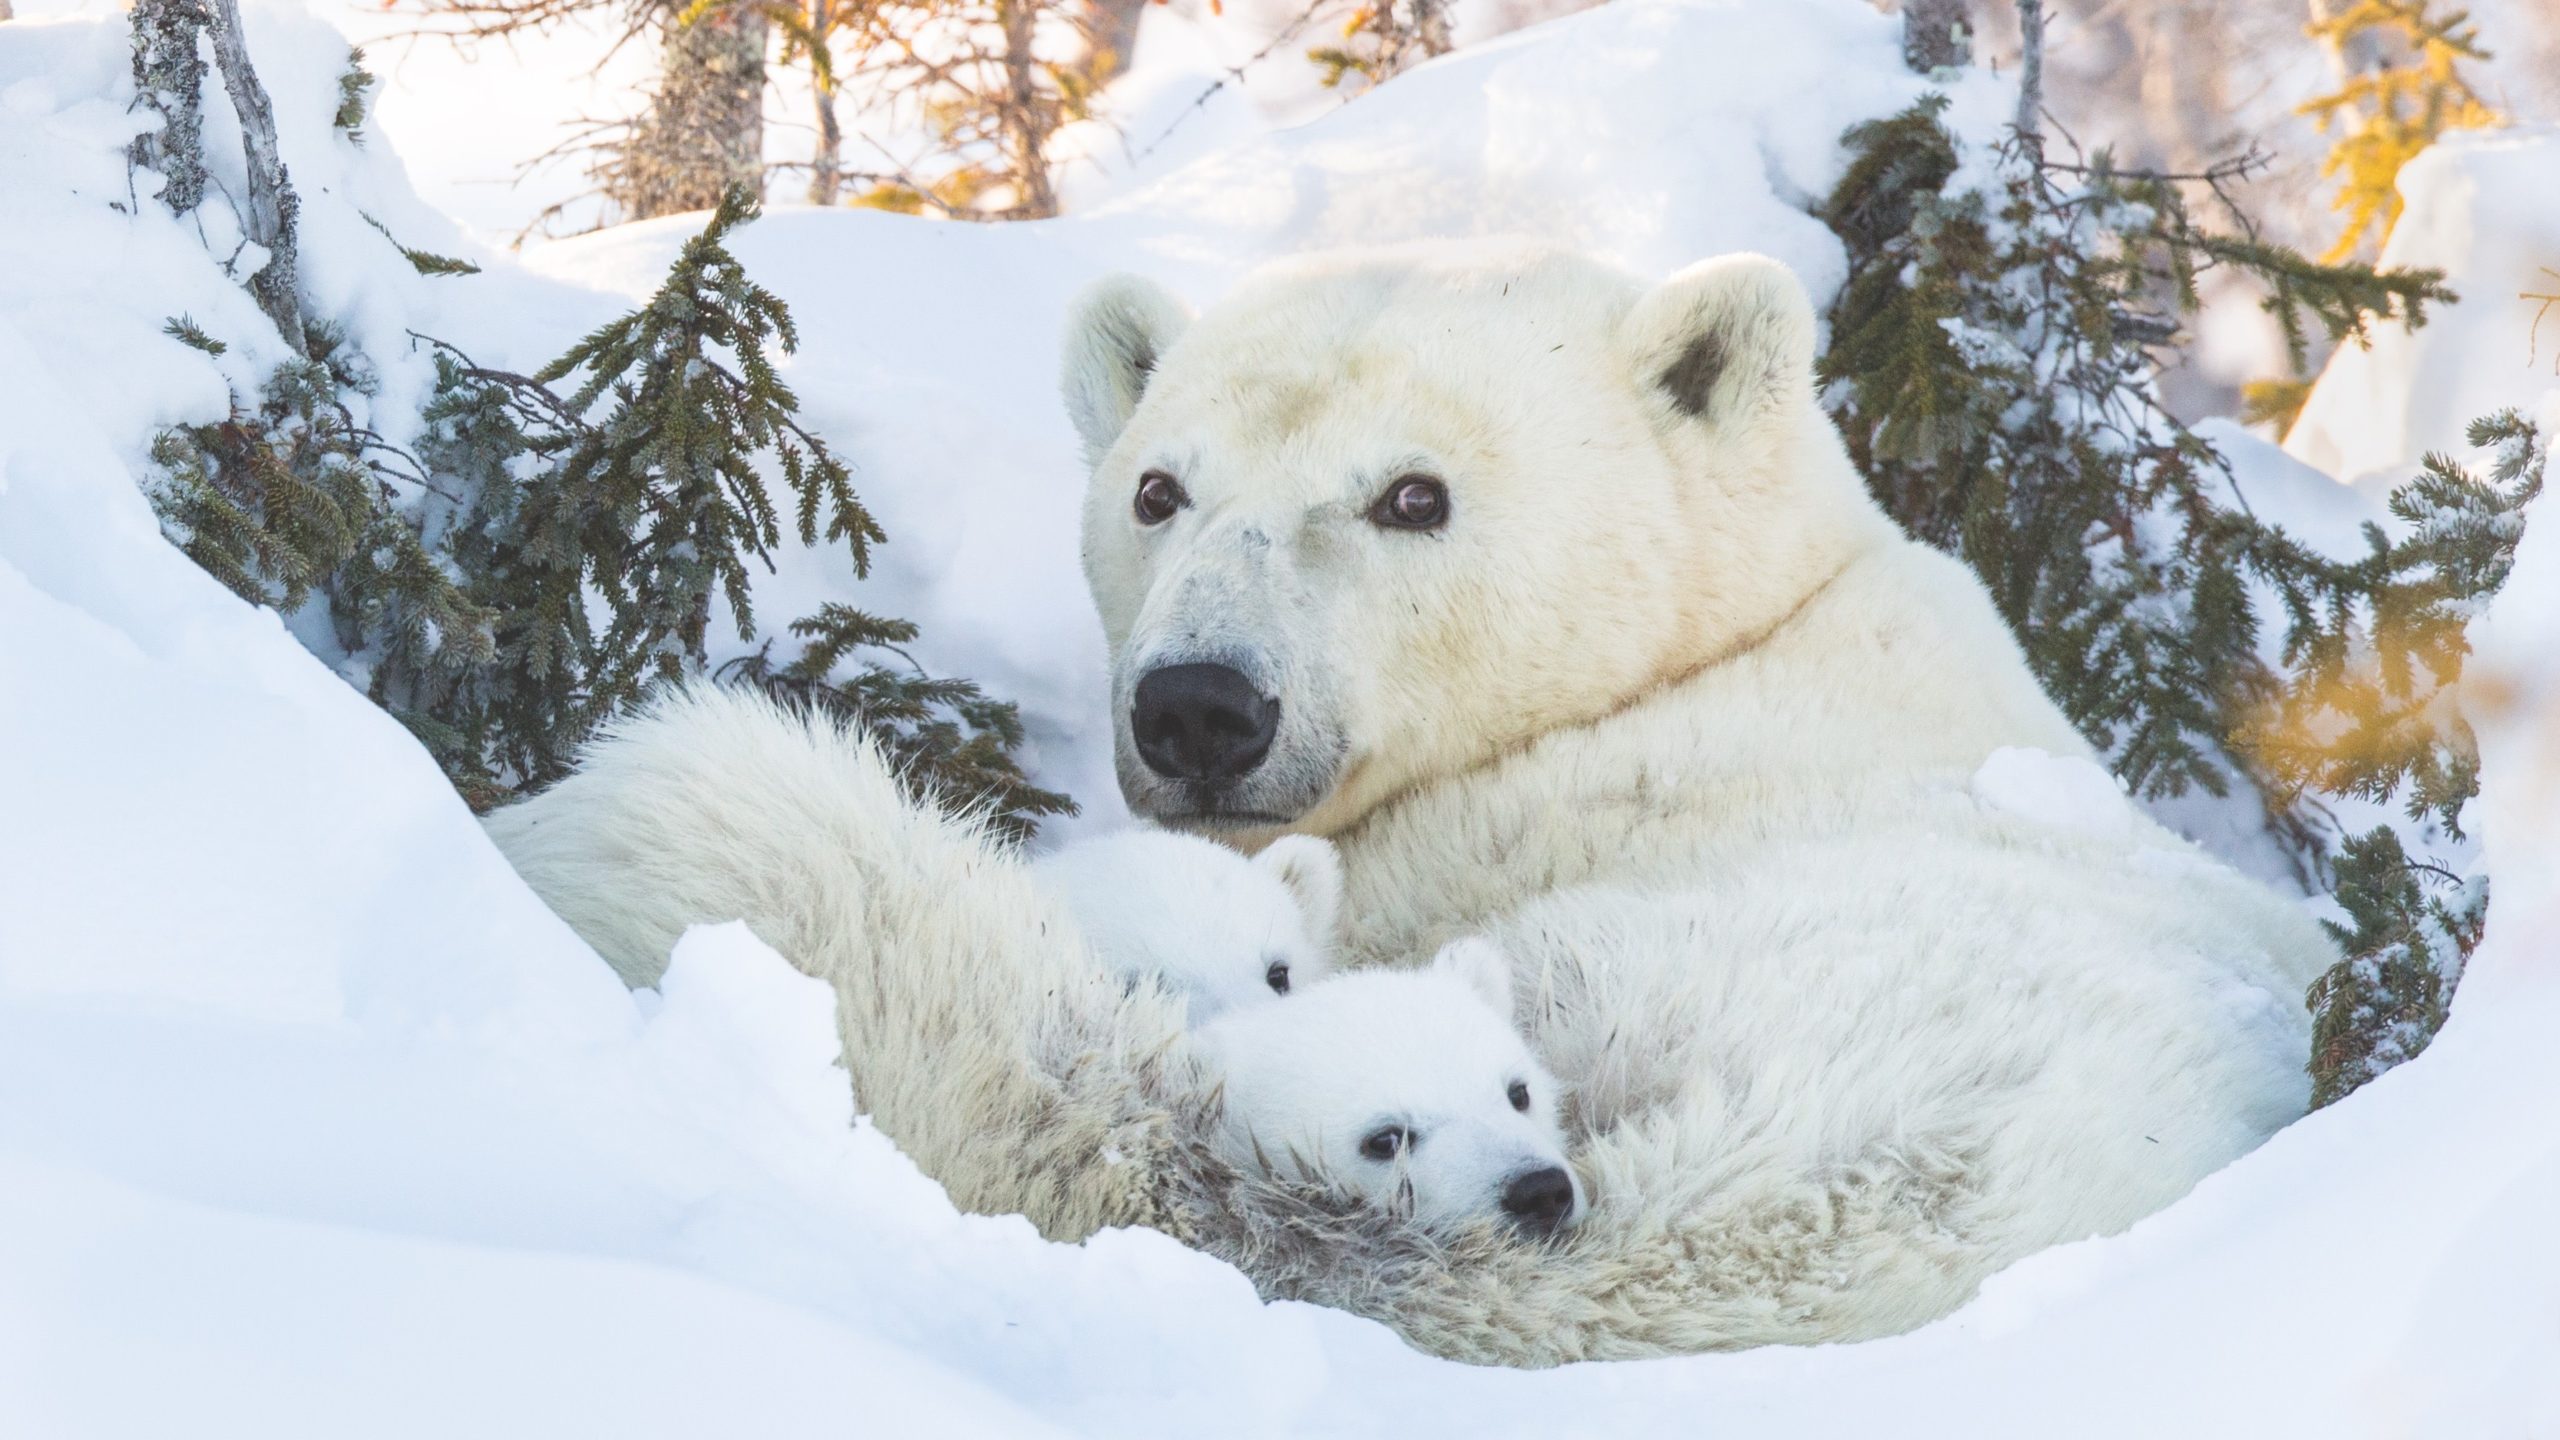 The polar bear cubs in this photo, taken at Wapusk National Park in Canada, are fresh out of the den and seeing the world for the first time. (Photo: Suzi Eszterhas/New On Earth: Baby Animals in the Wild/courtesy of Earth Aware Editions)